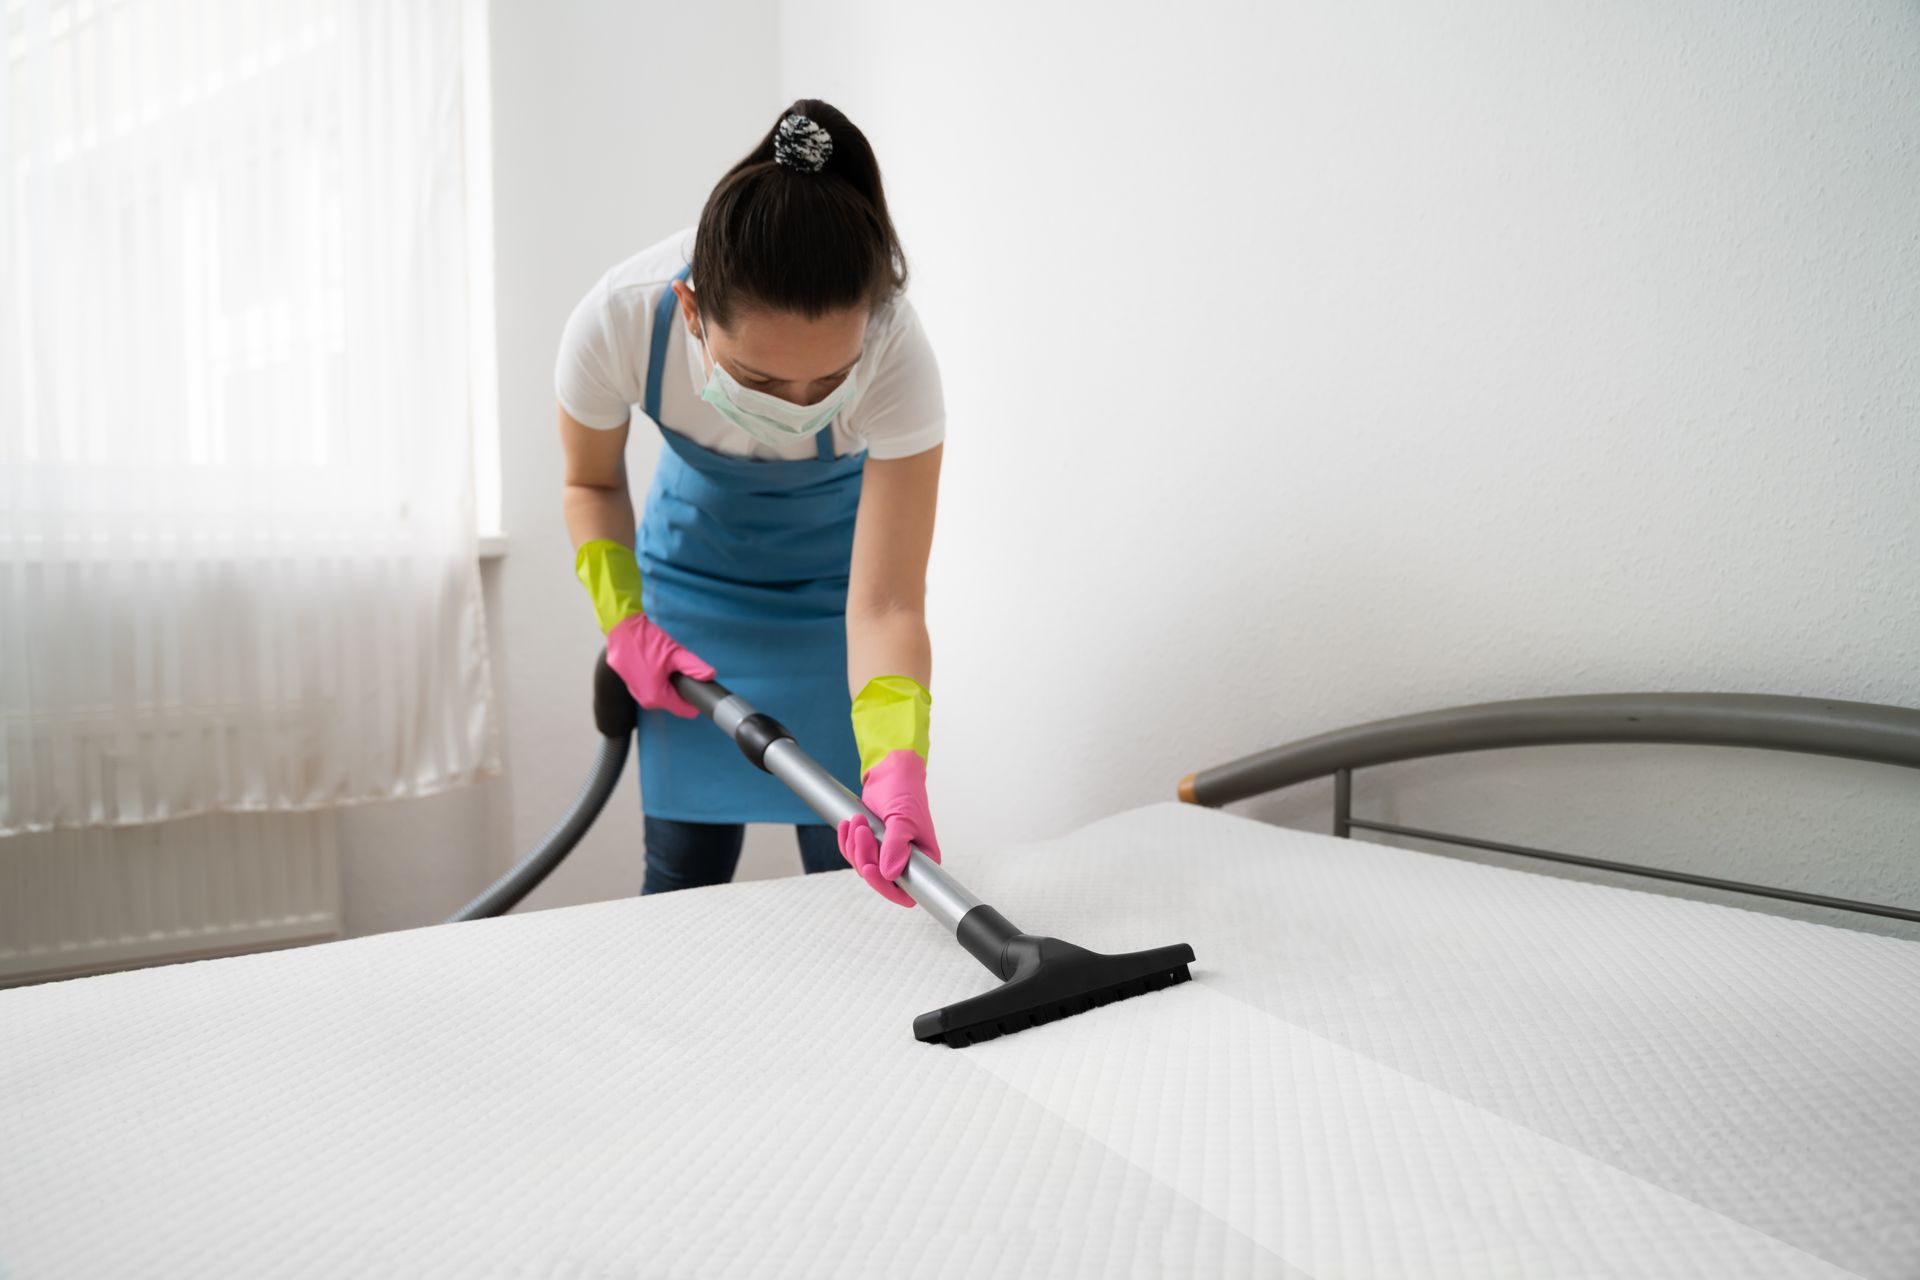 Mattress Cleaning services